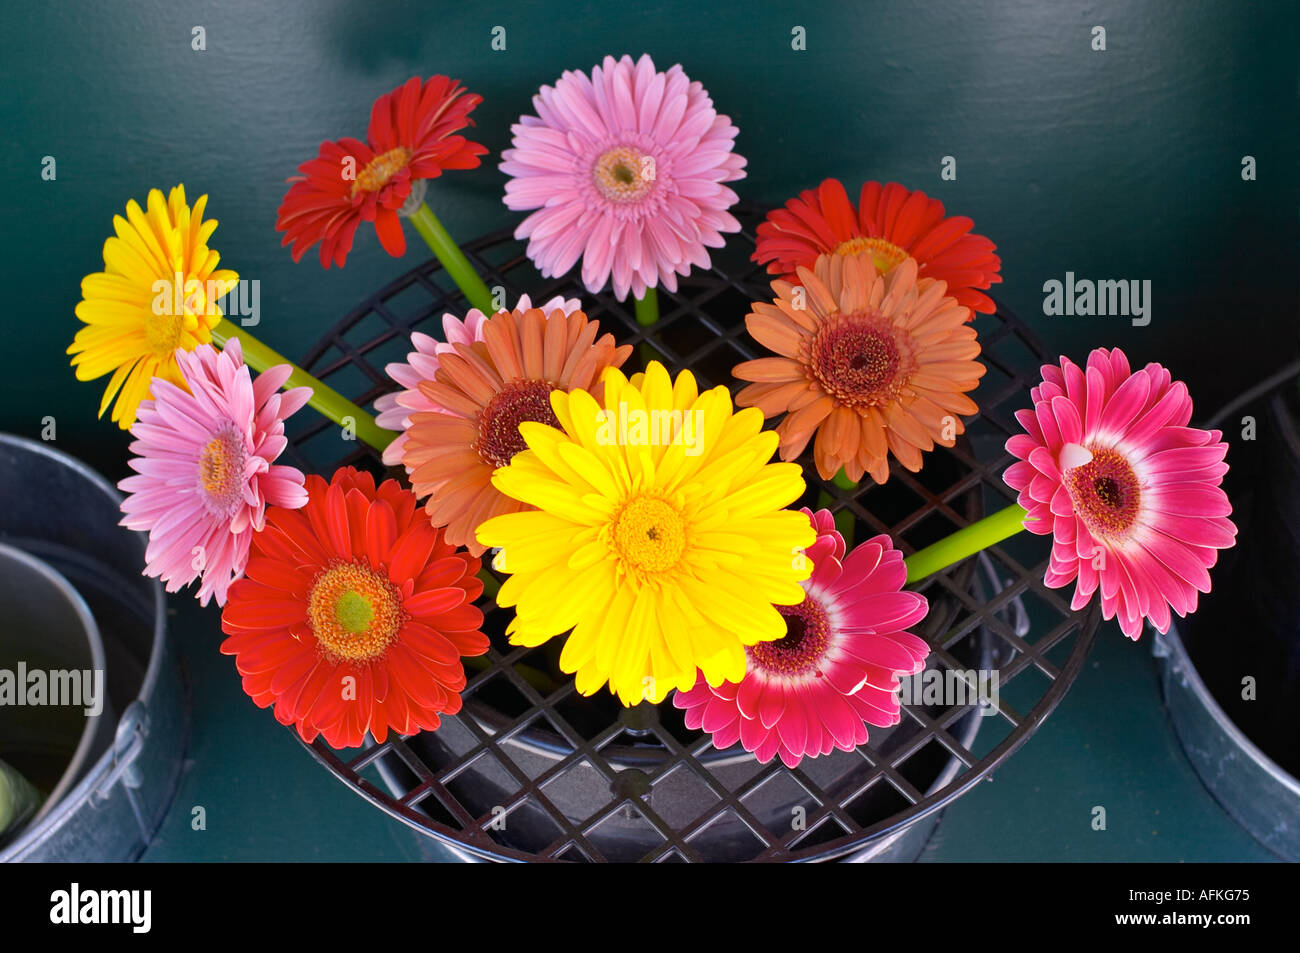 Gerbera daisies. Suitable for a postcard, greeting cards or calendar. Stock Photo